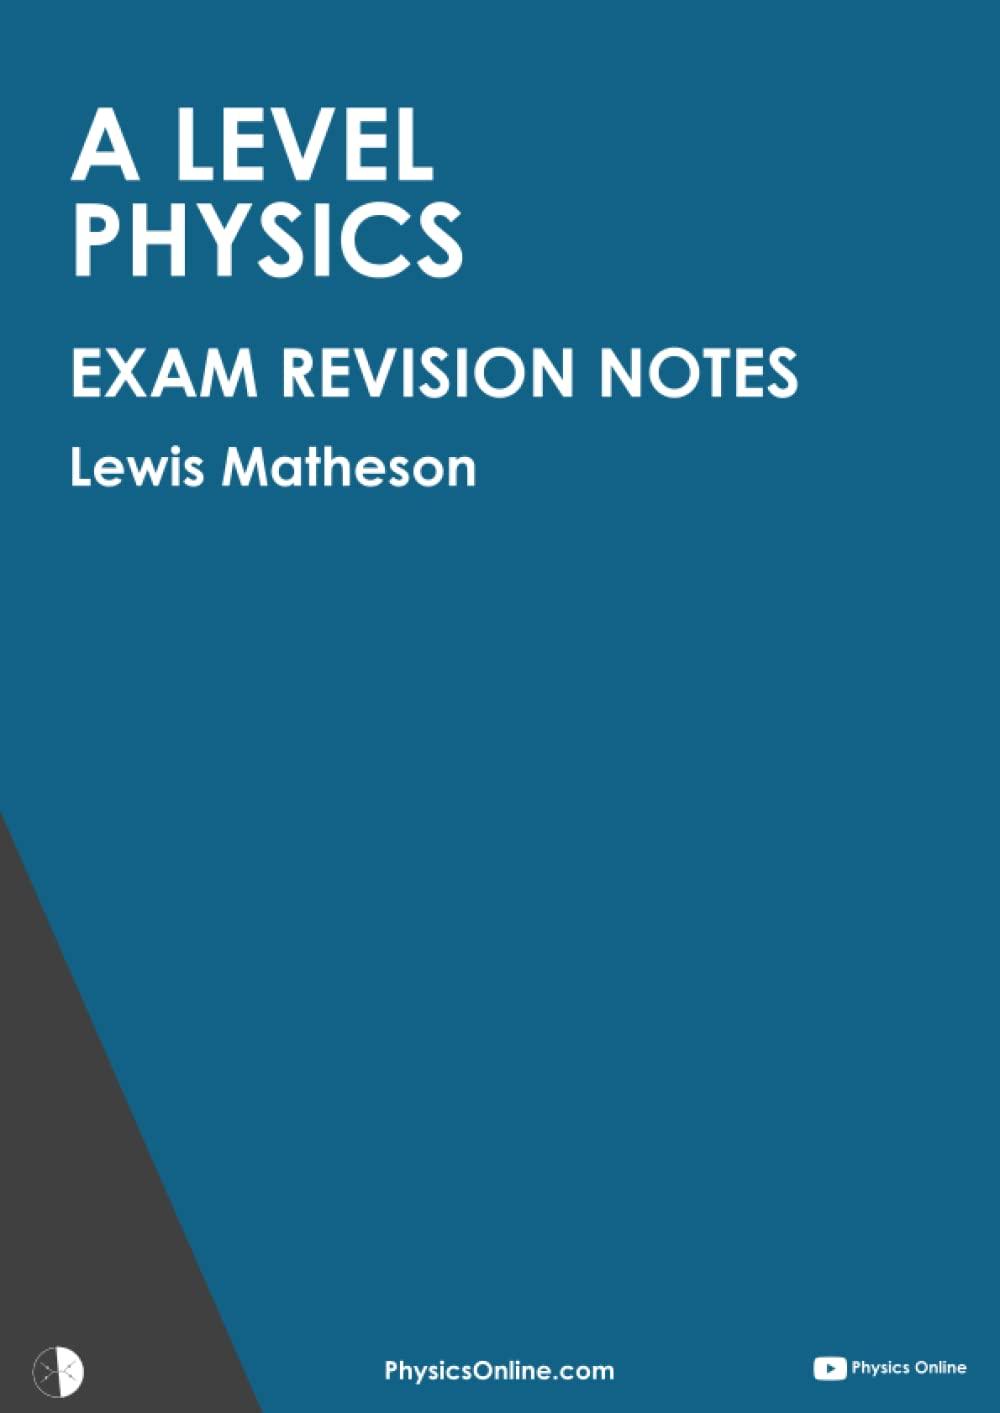 a level physics exam revision notes 1st edition physics online, lewis matheson b0991fg9bl, 979-8530623660